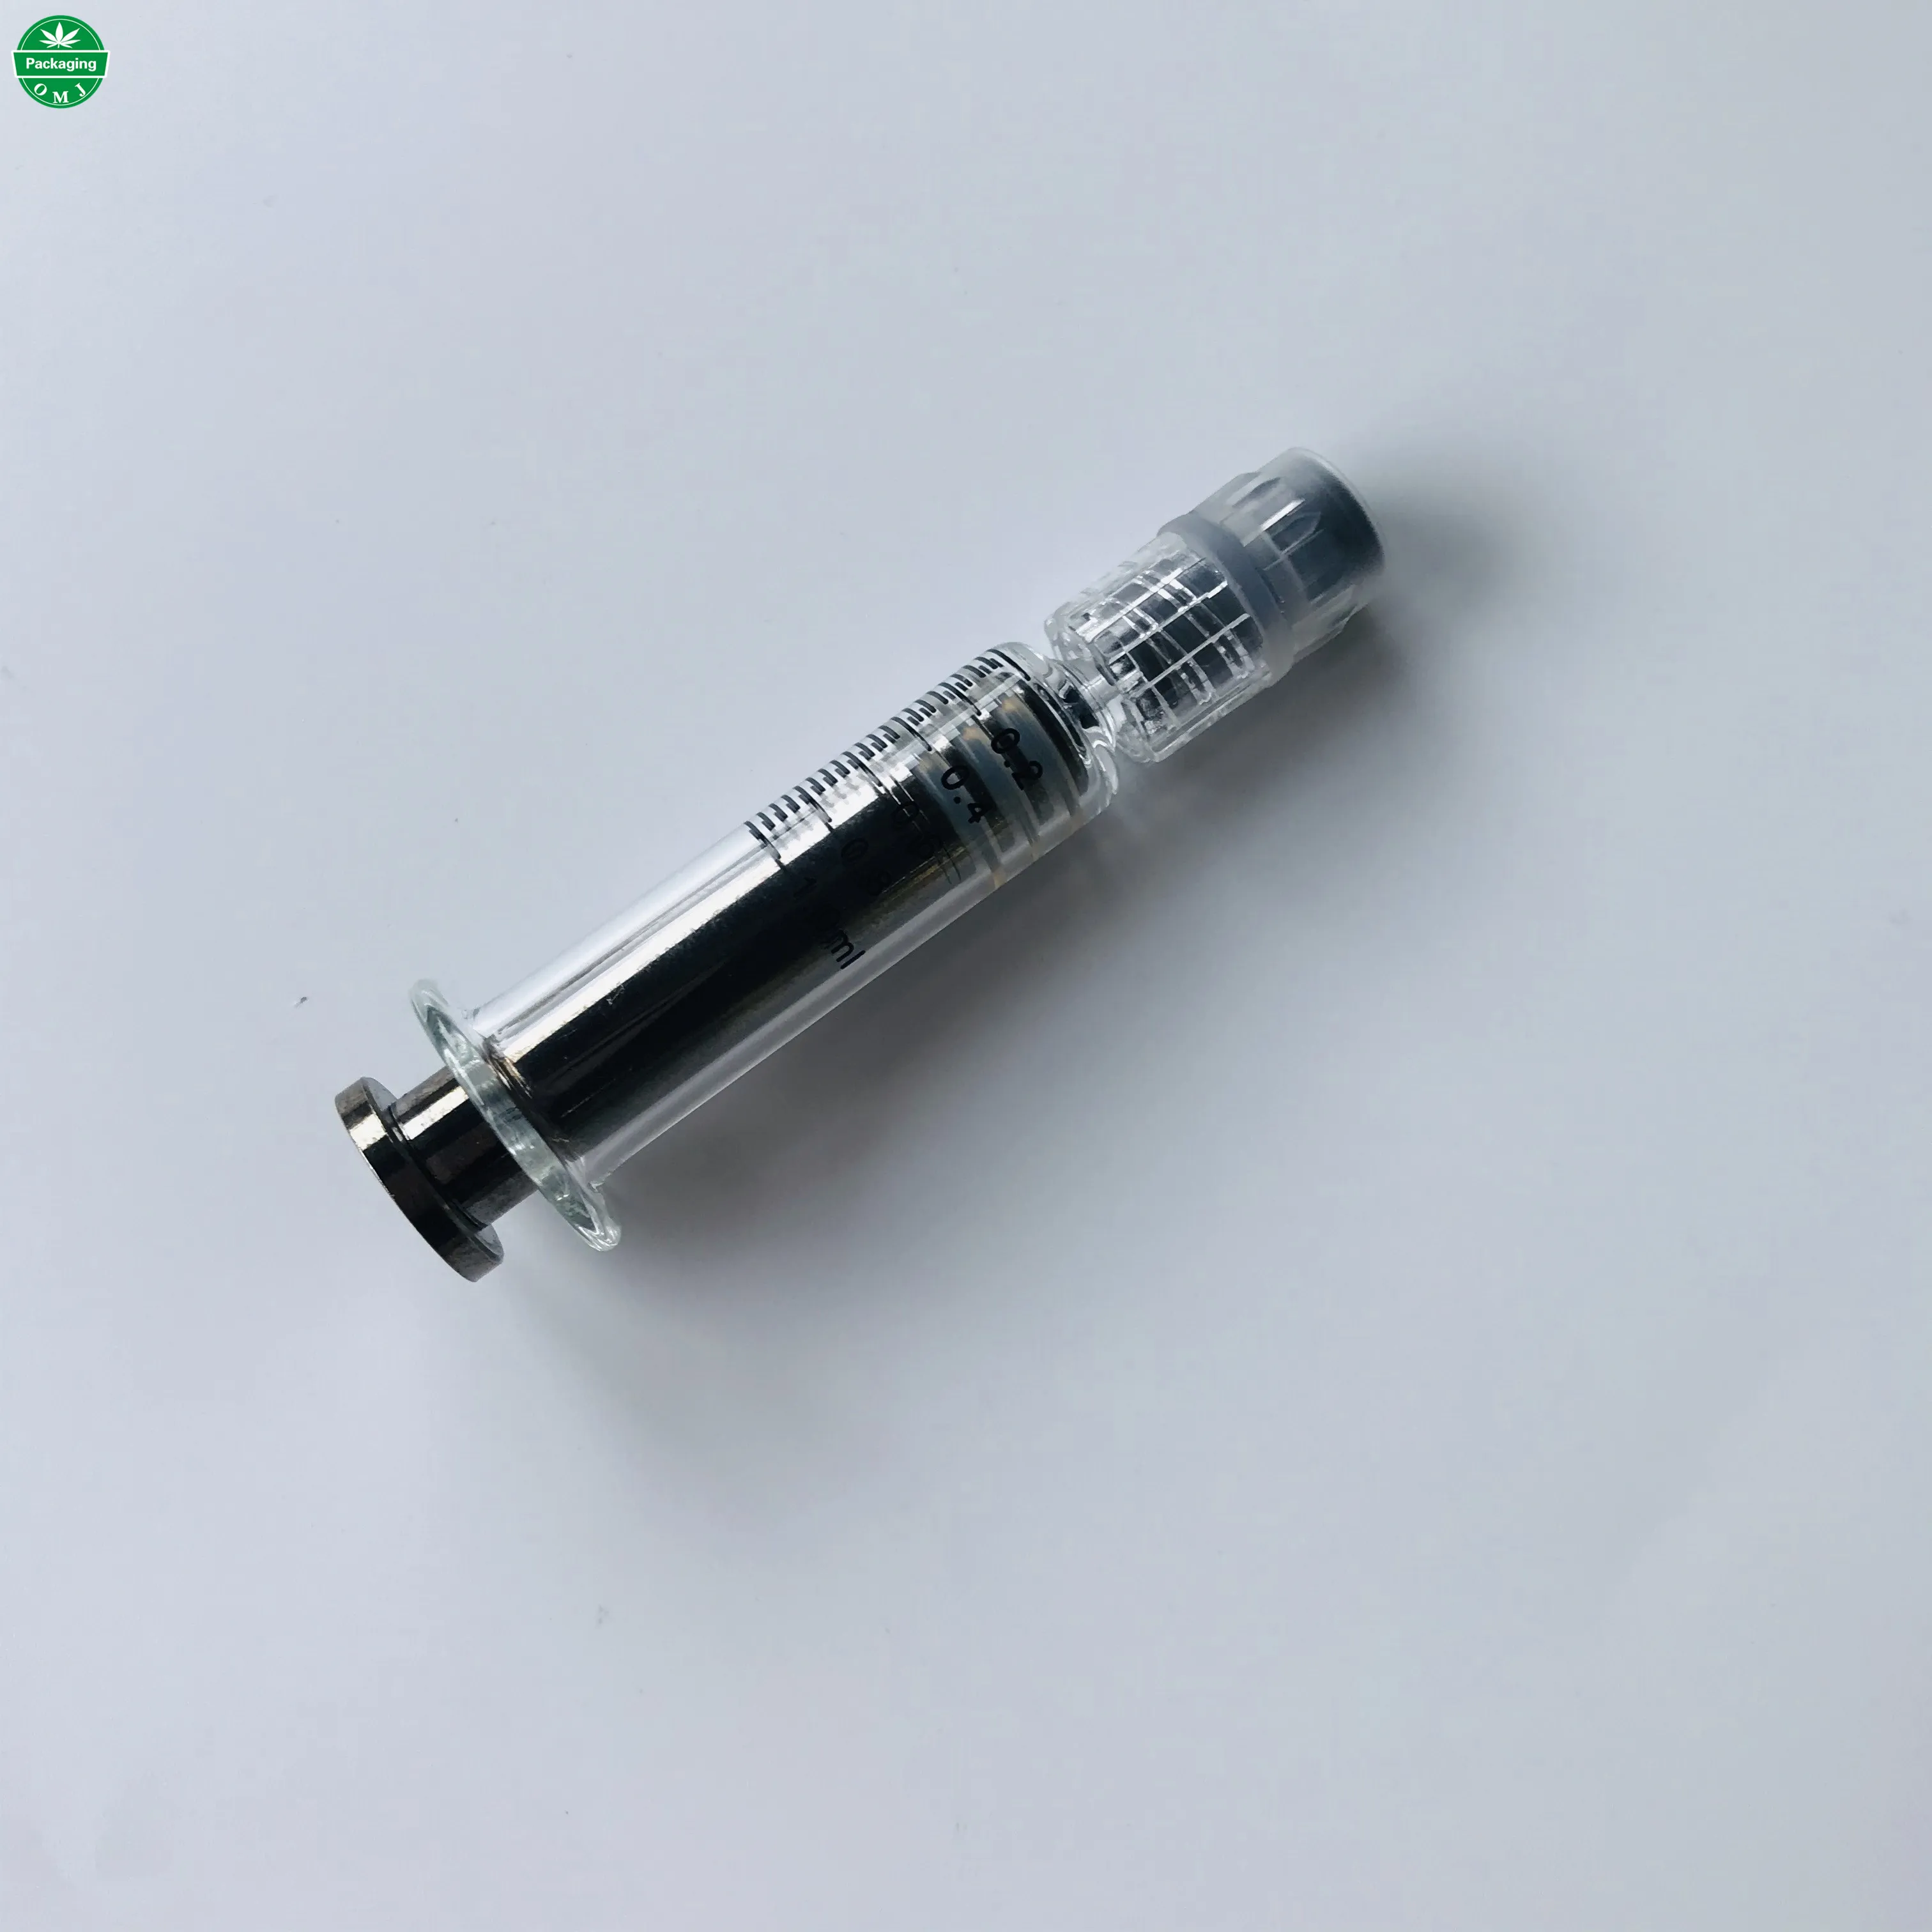 disposable medical grade 1ml glass syringe with luer lock and metal rod